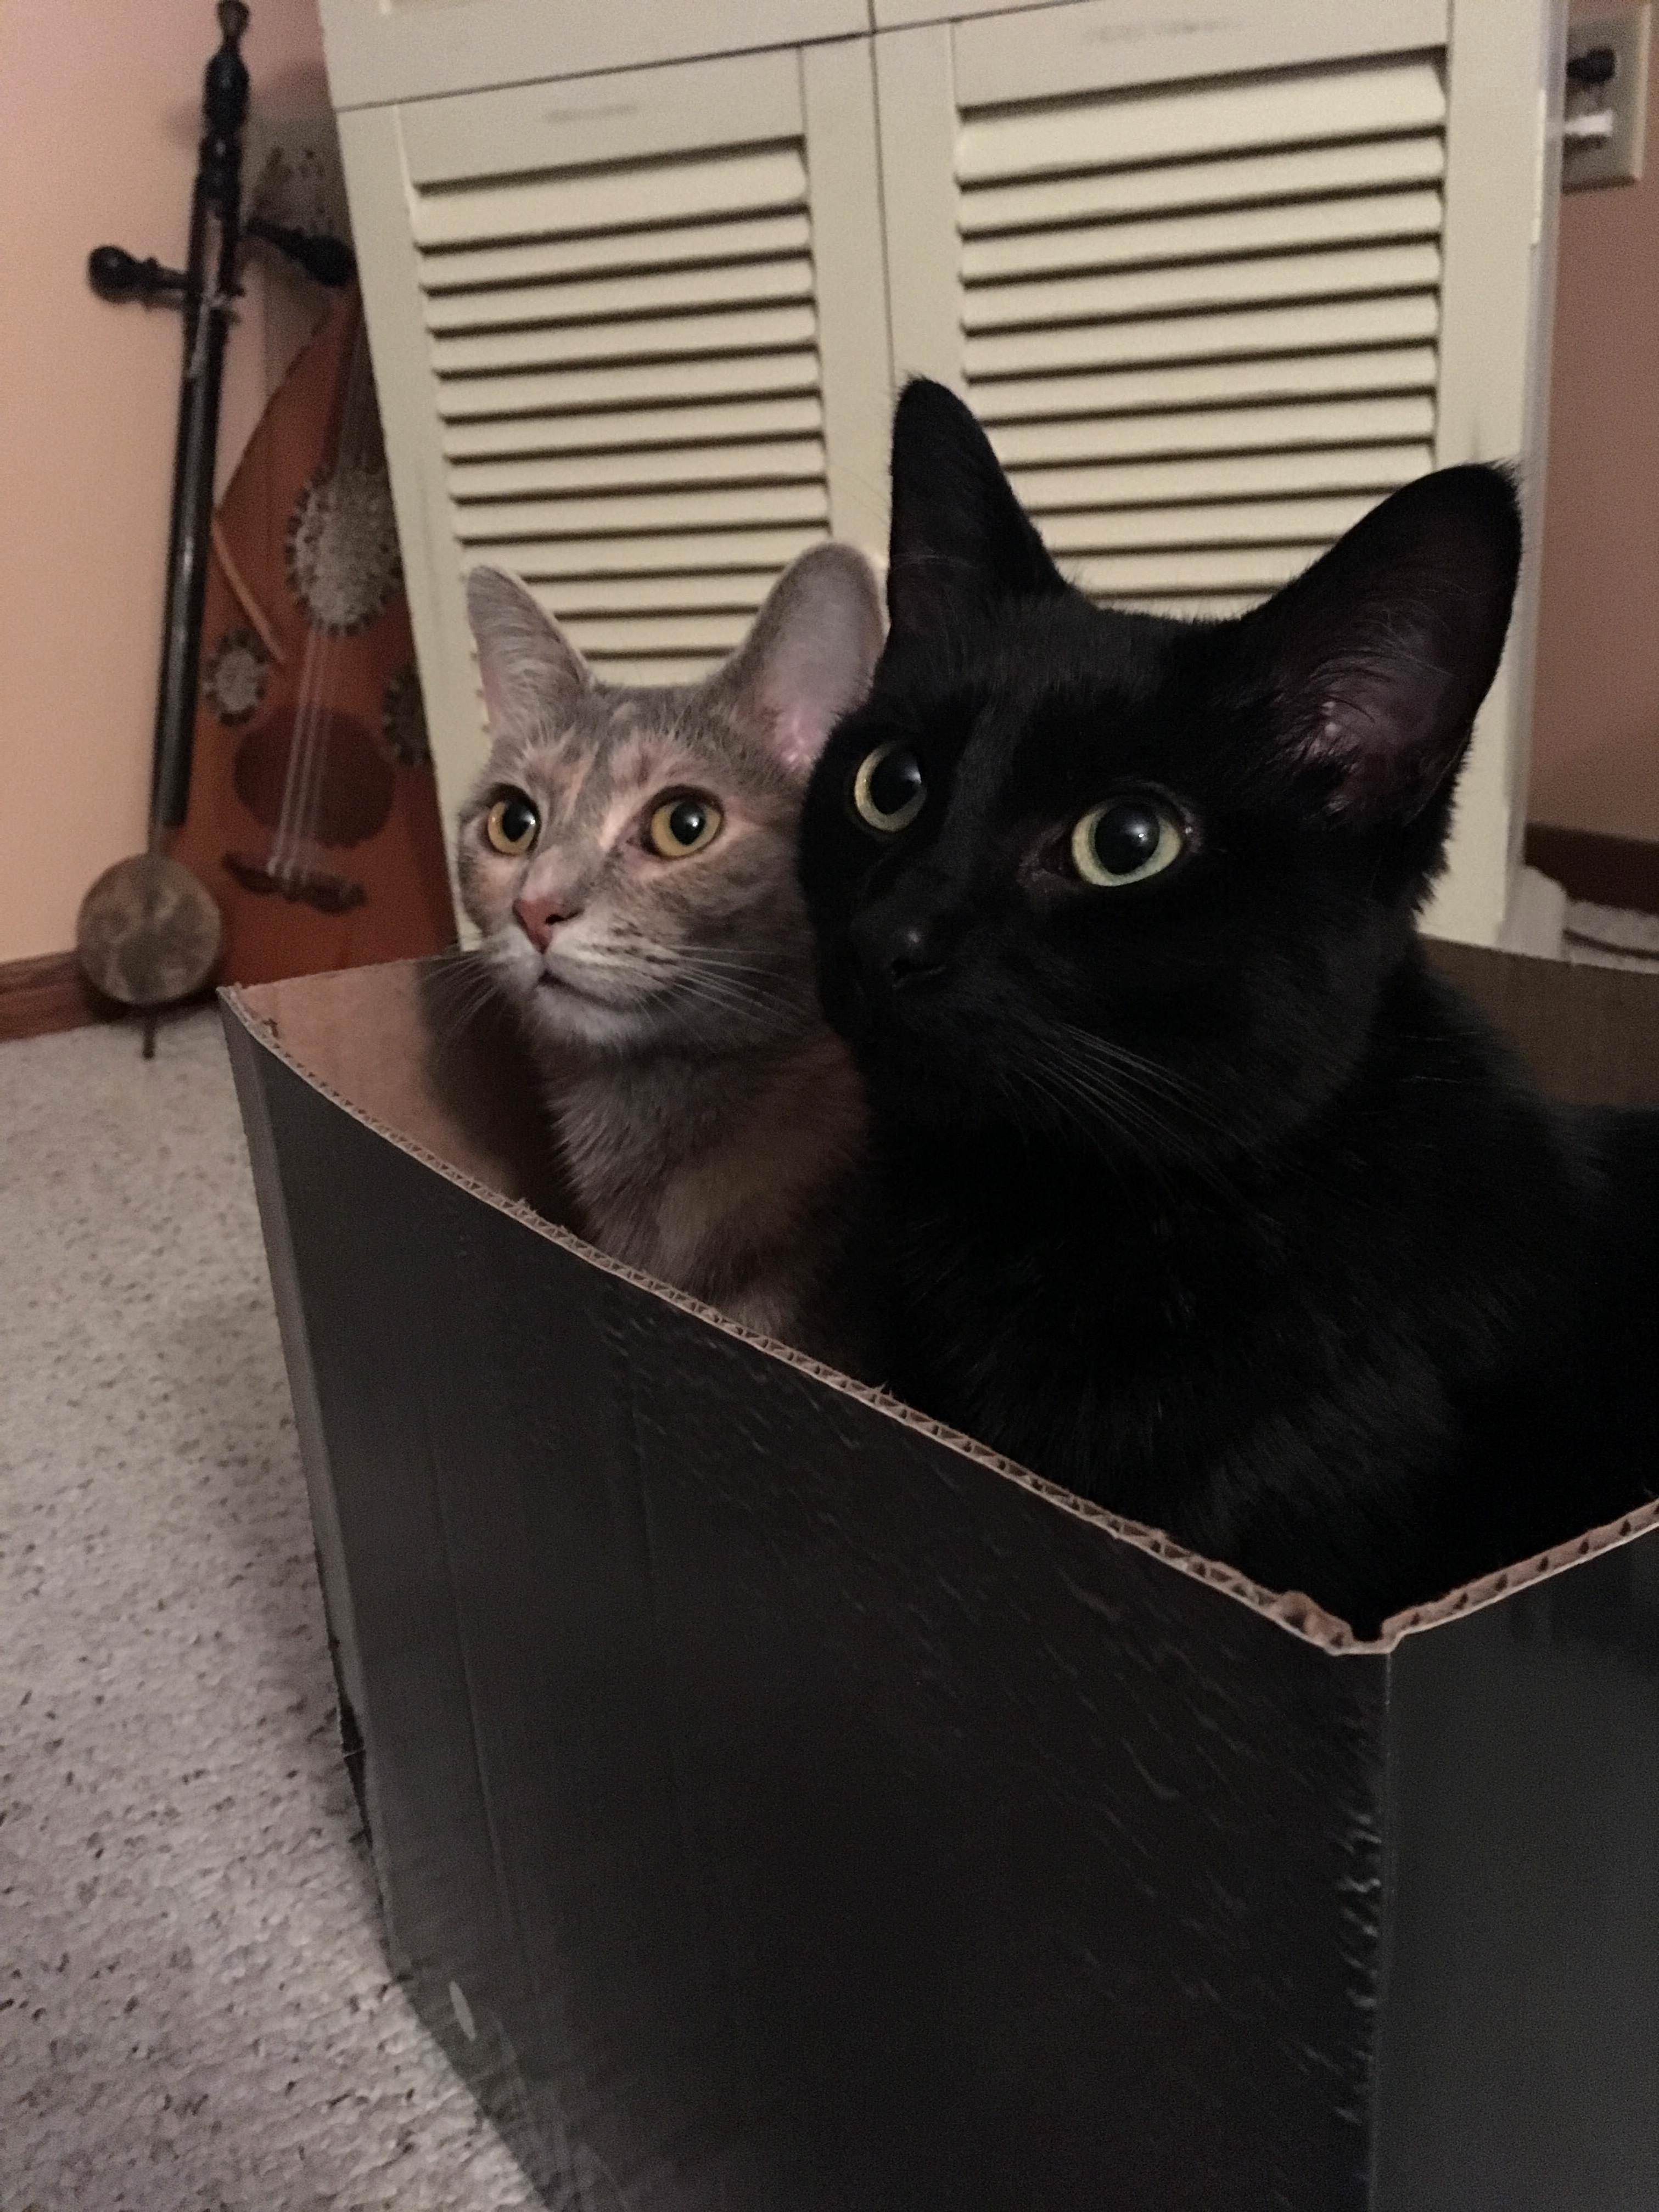 Can we both fits